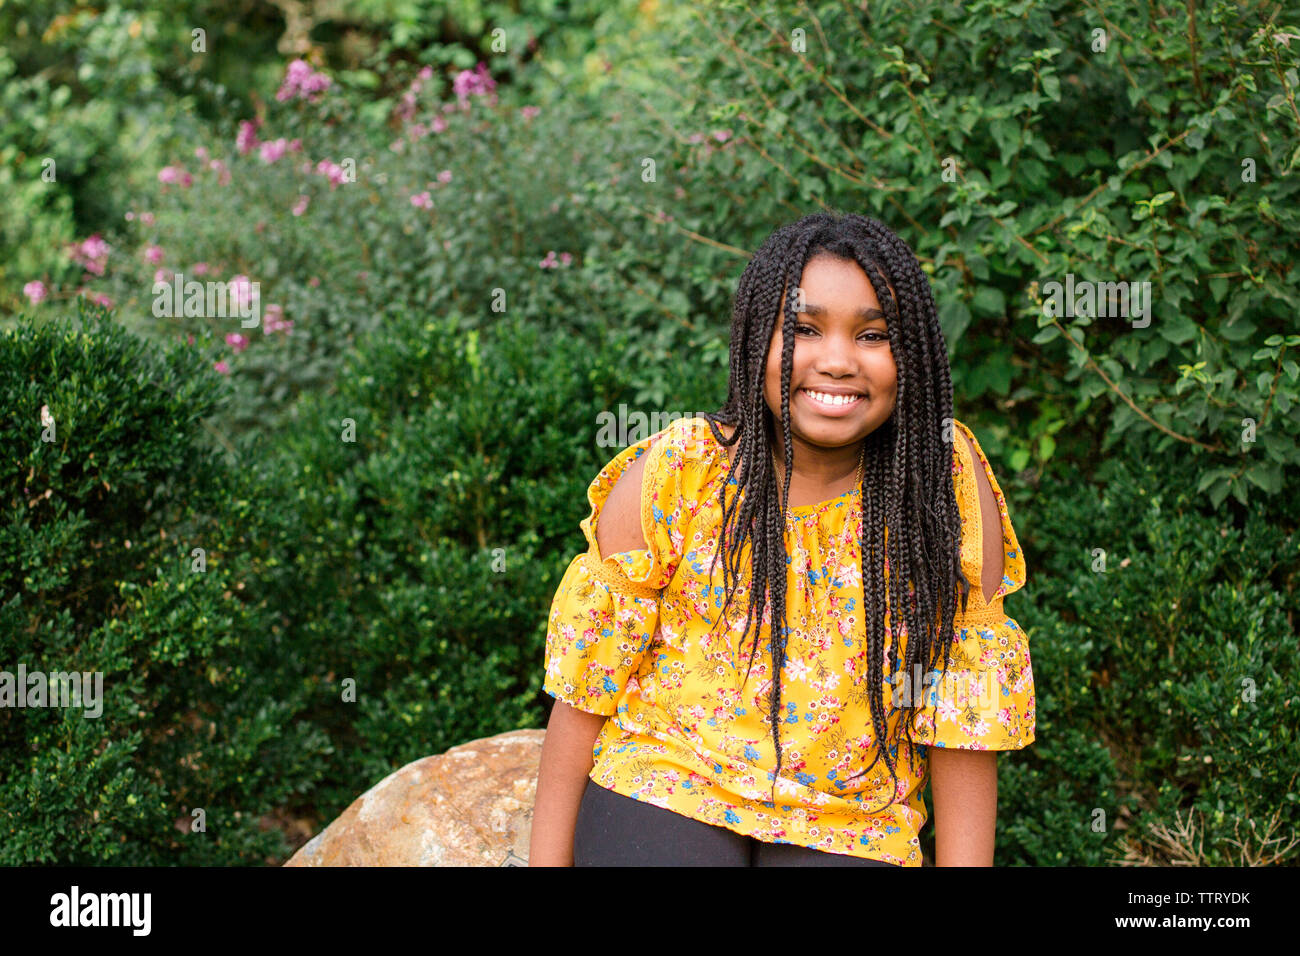 Portrait of smiling girl with braided hair sitting on rock against plants in park Stock Photo